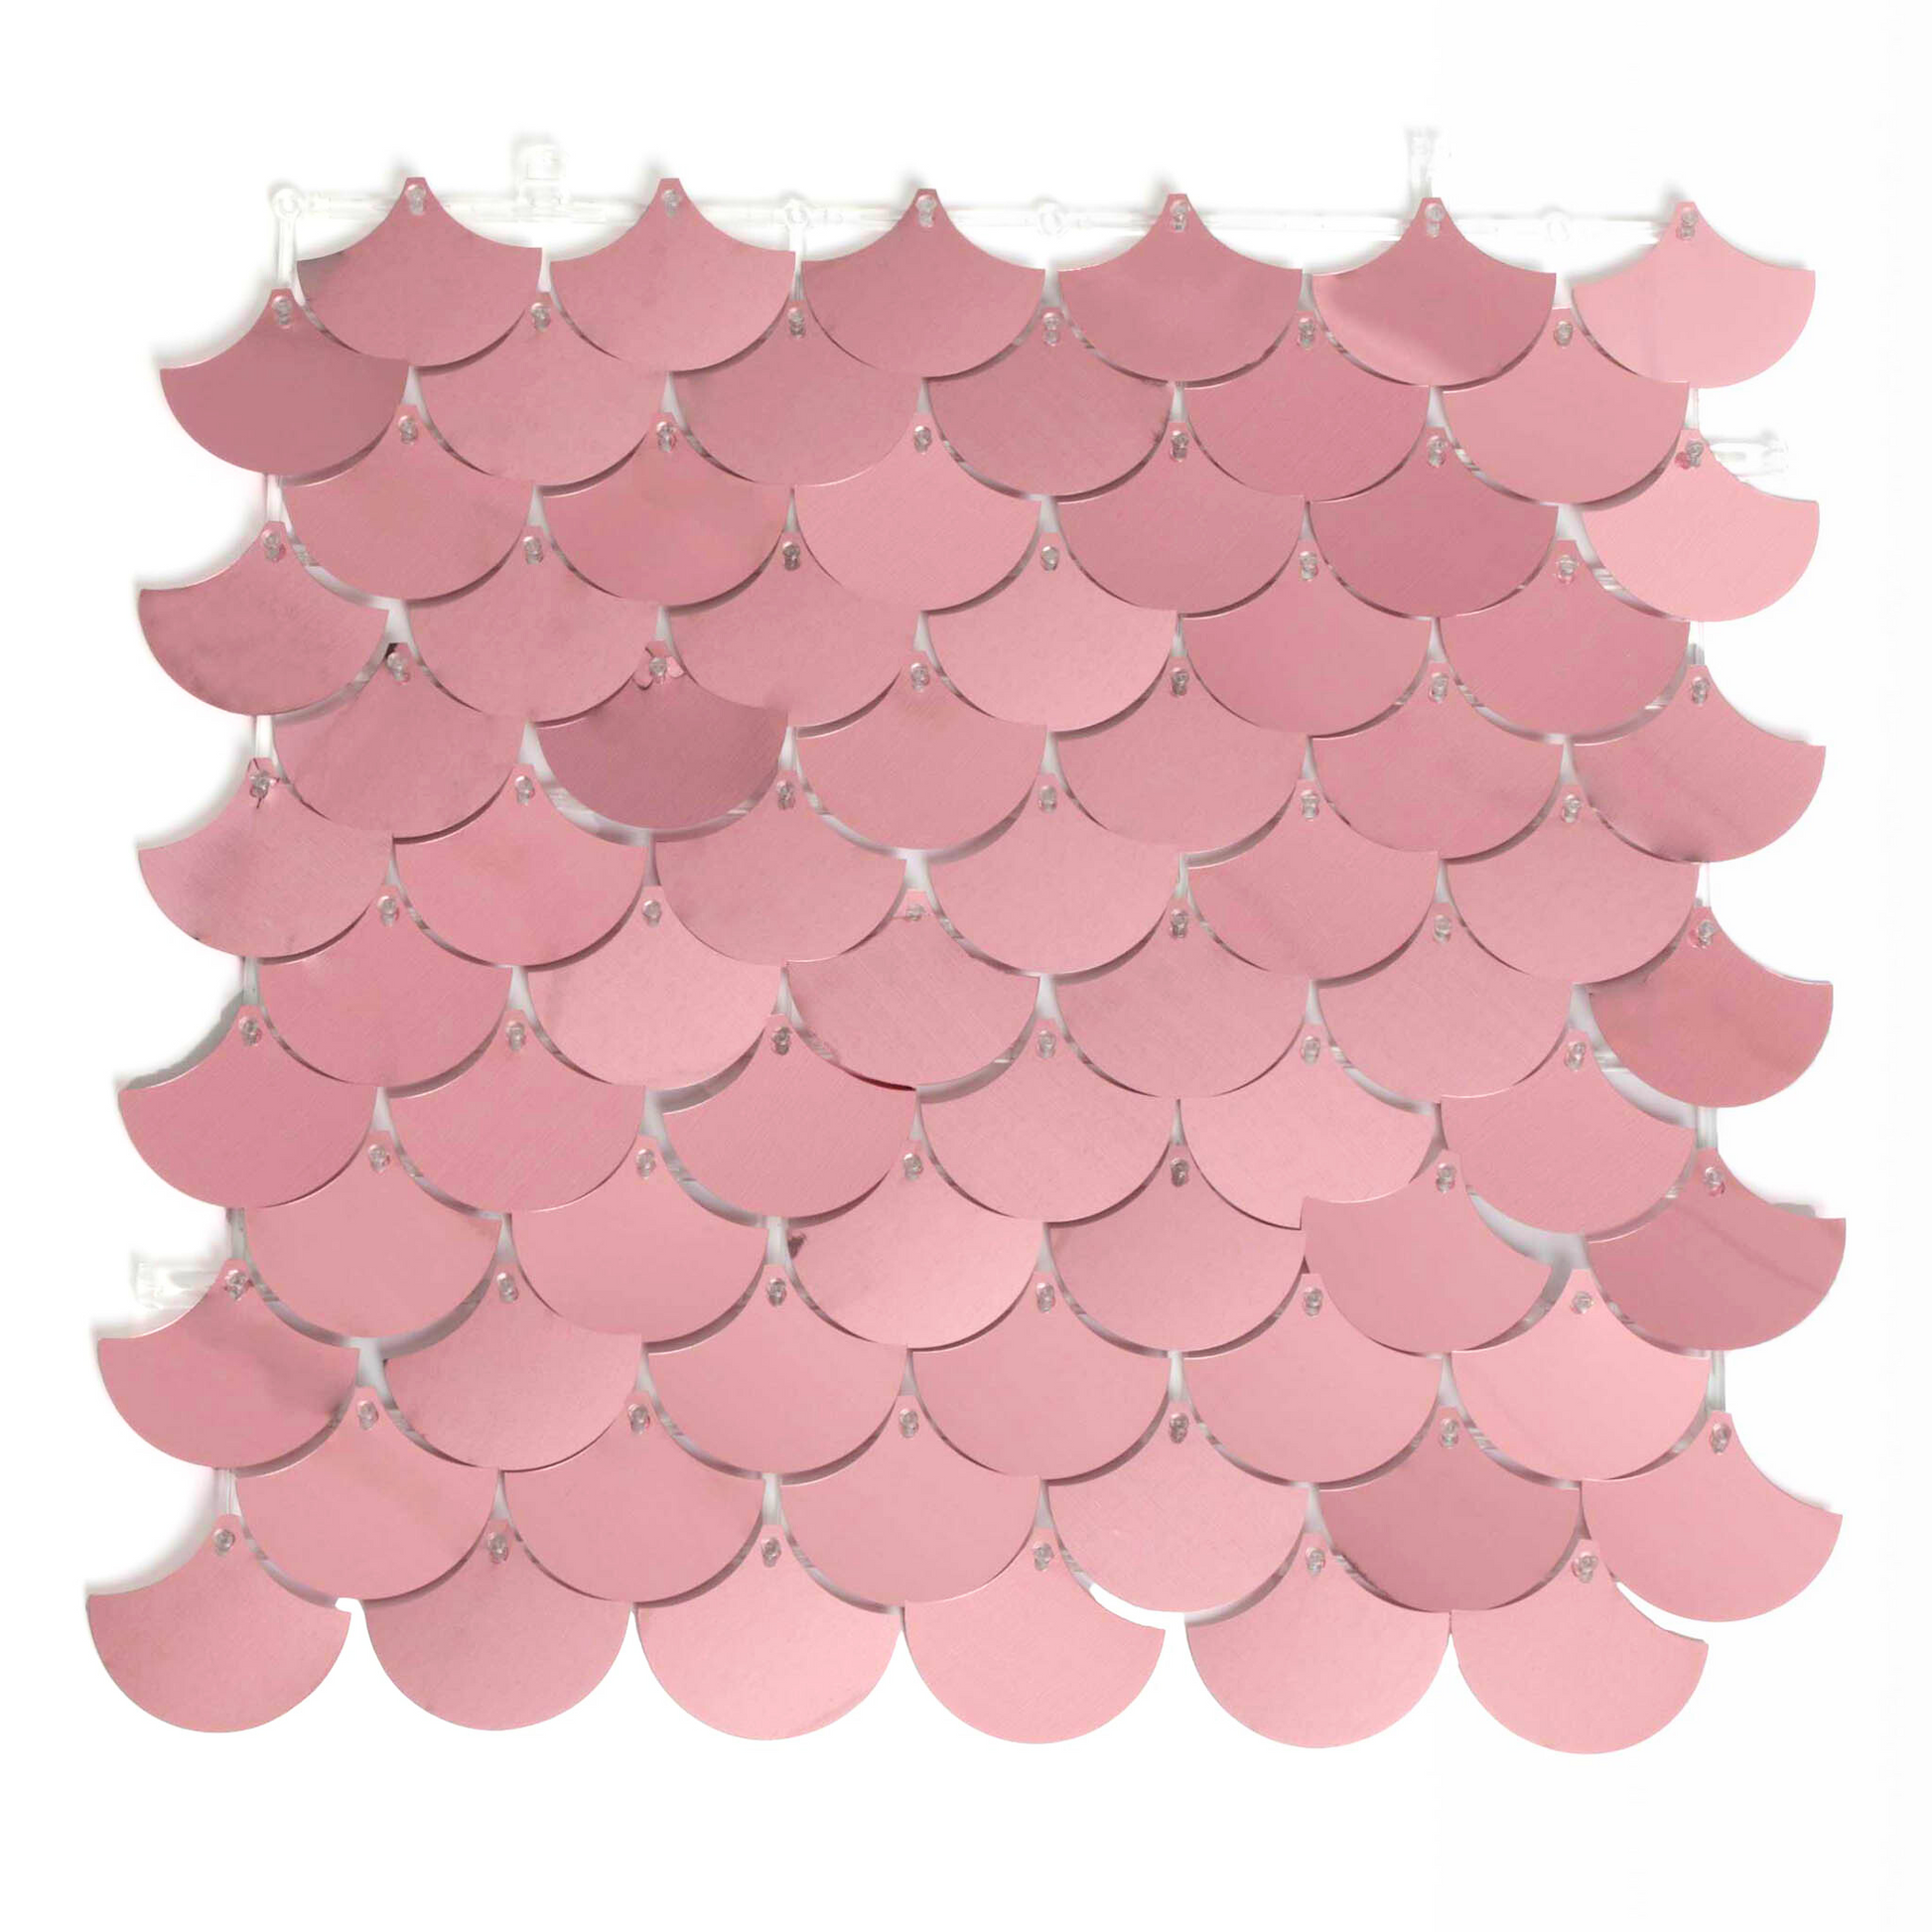 Mermaid Scale Sequin Wall Panel Backdrops (24 panels) - Pink